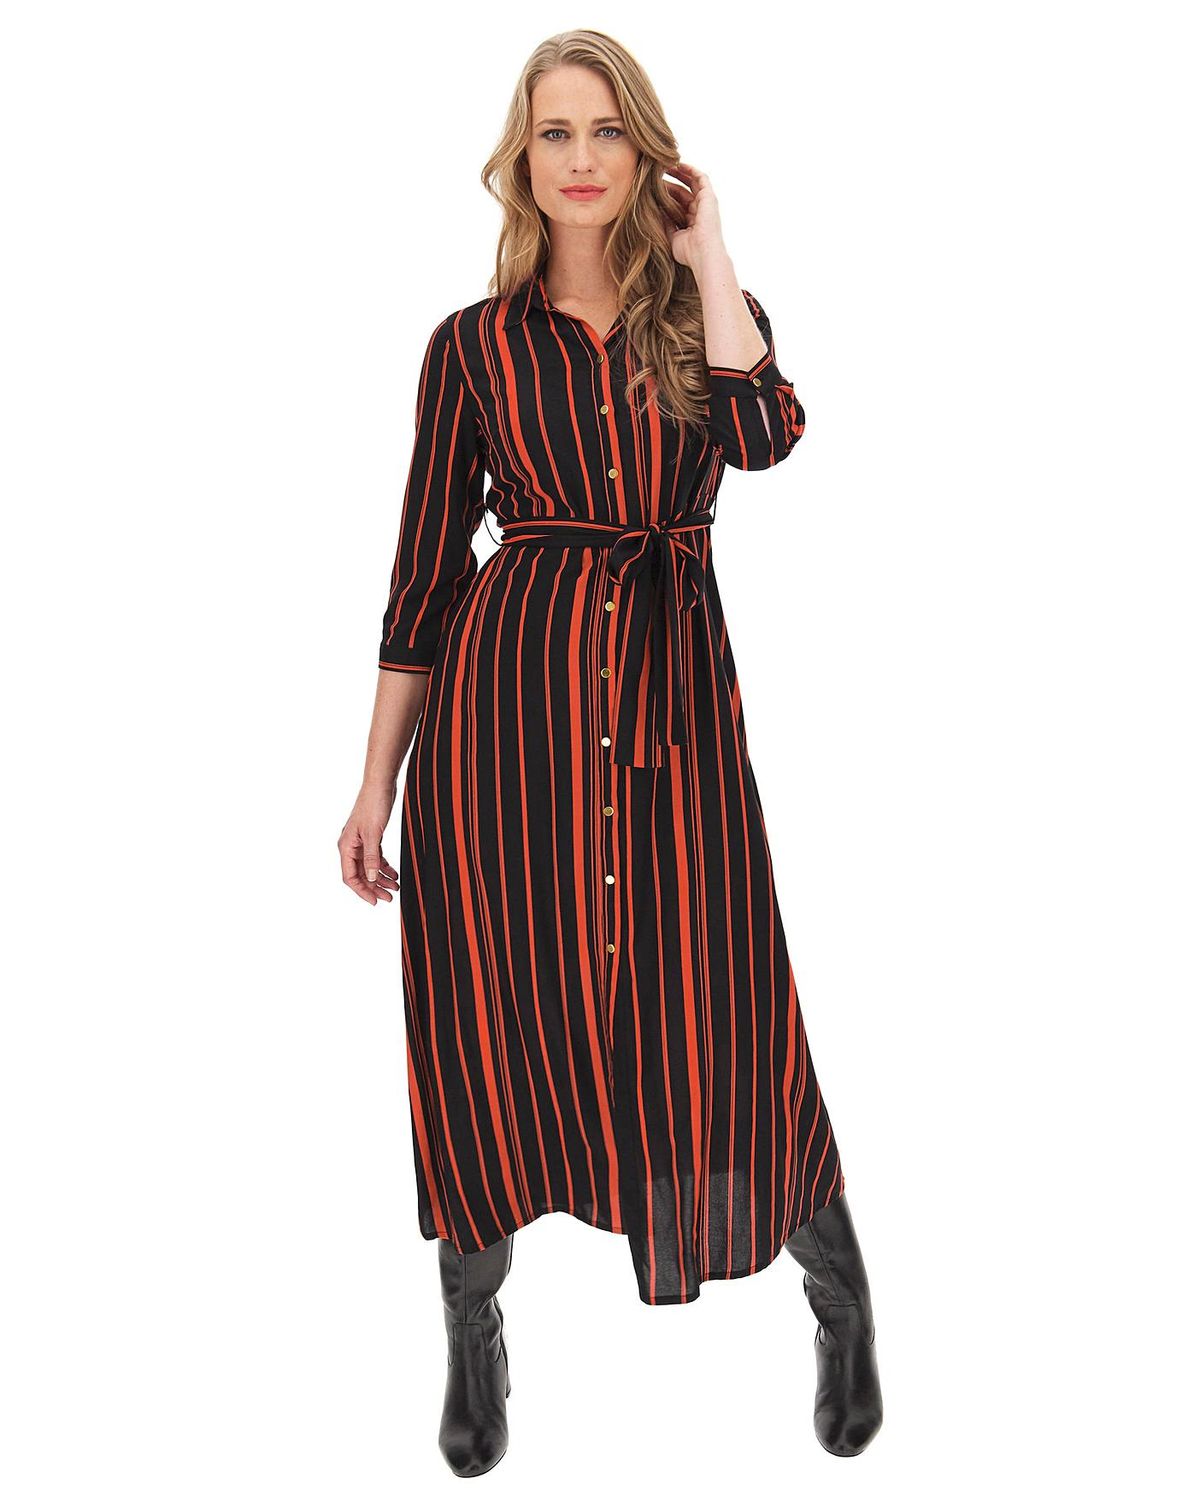 slimming dresses with sleeves | Woman & Home